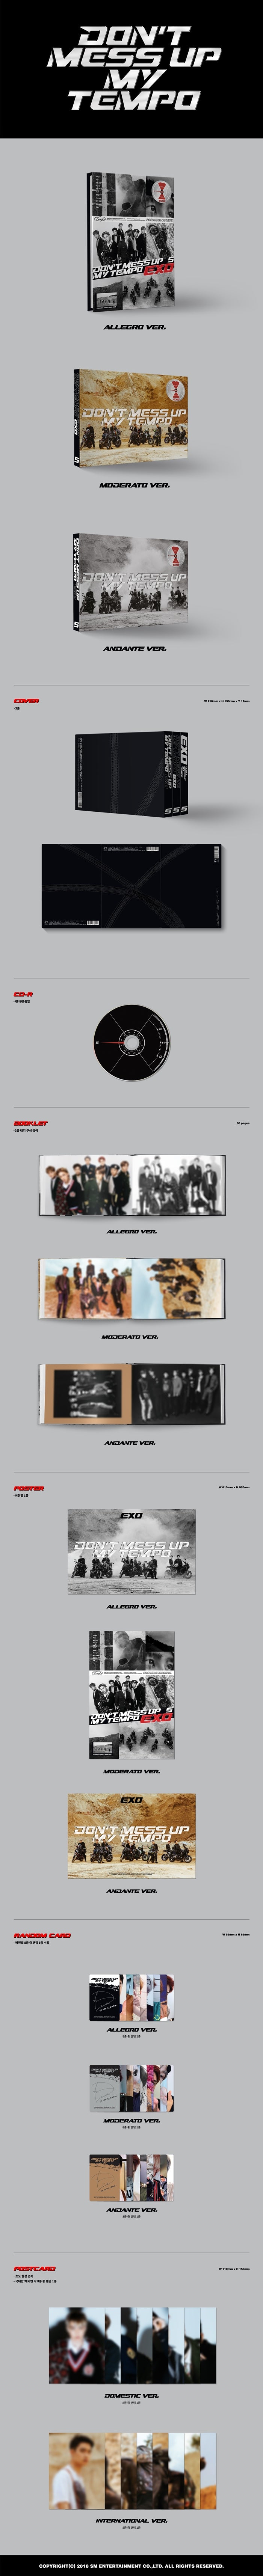 1 CD
1 Booklet
1 Card